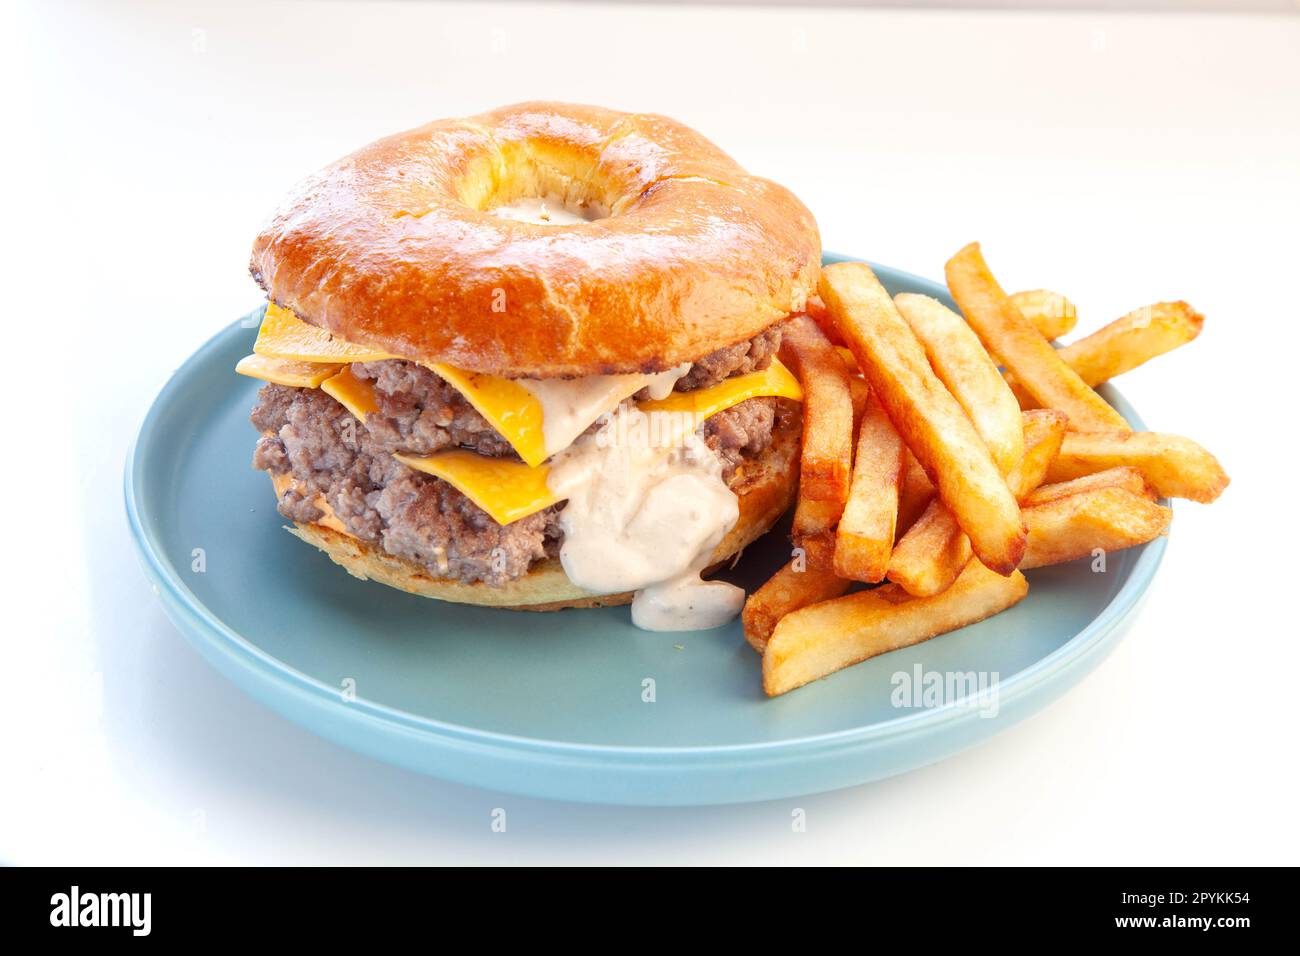 Beef burger with smashed patty and brioche doughnut bun. Stock Photo